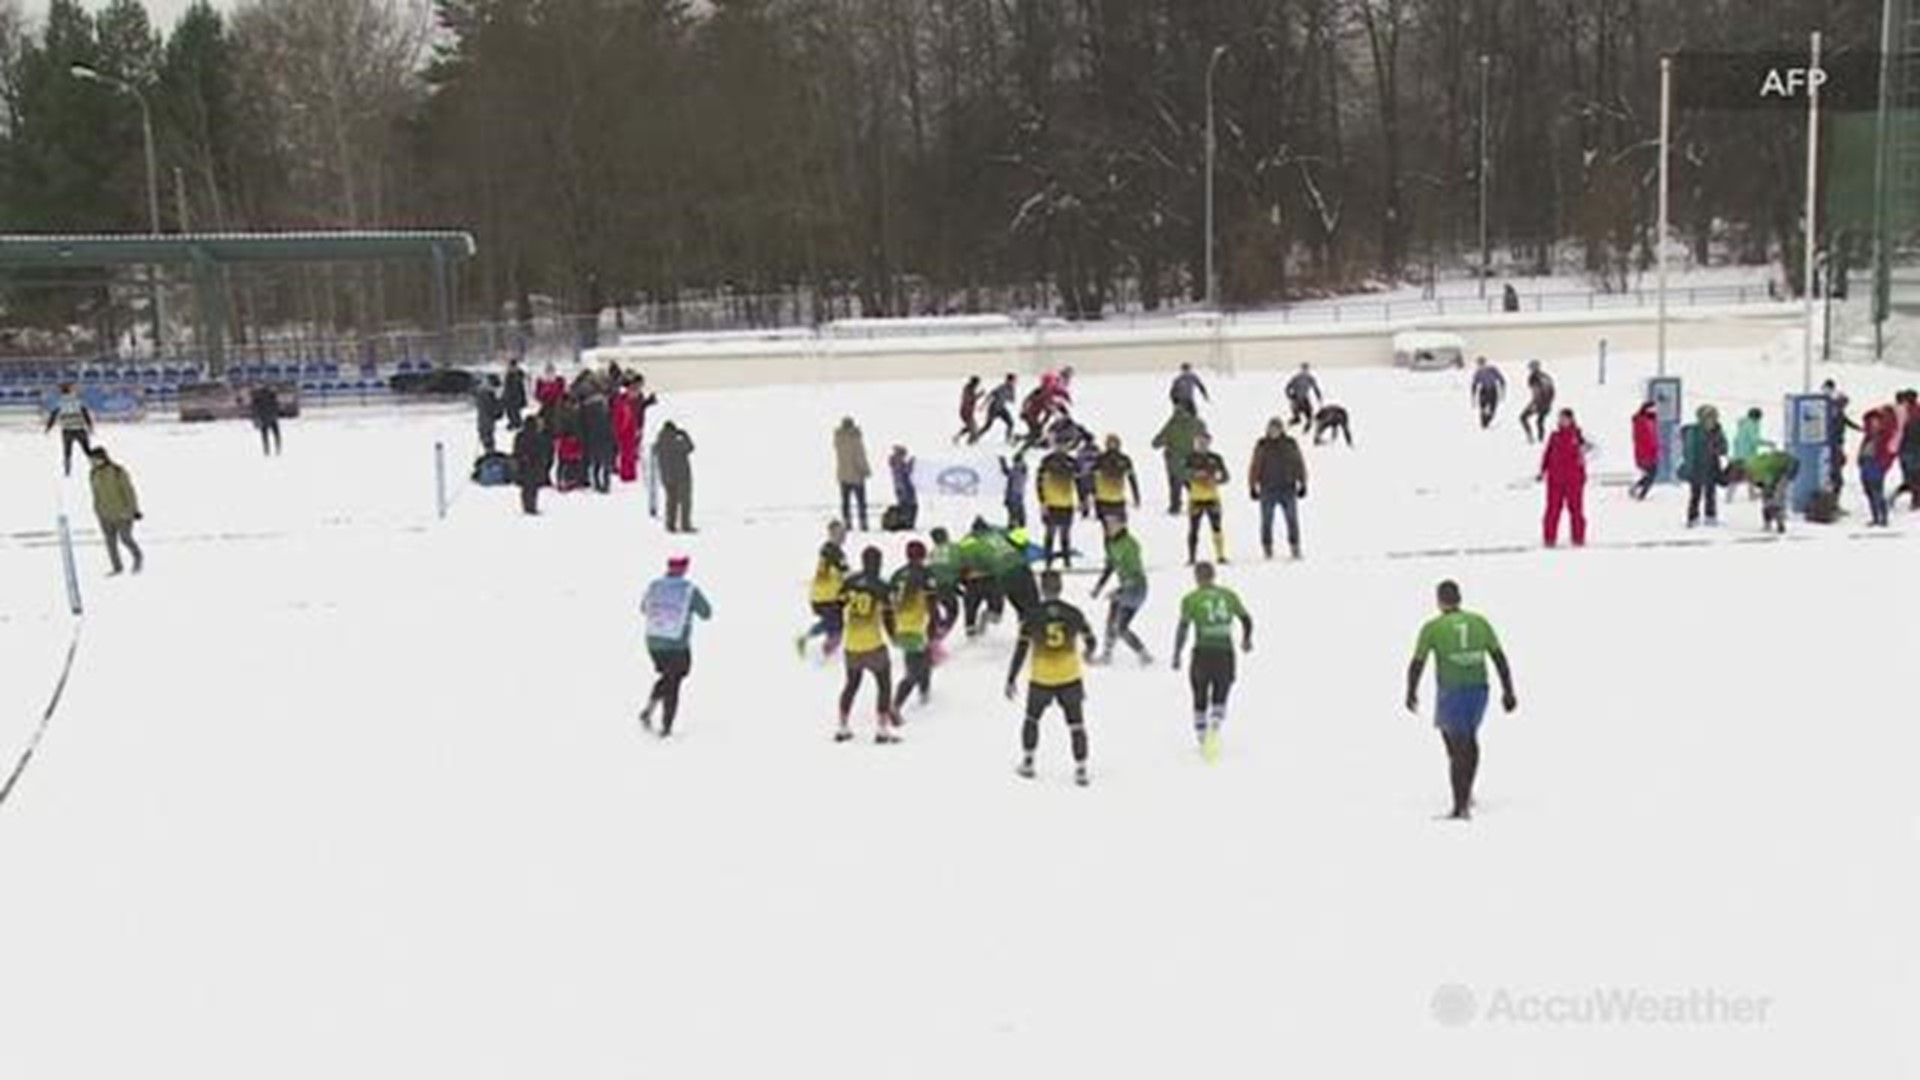 'Snow-Rugby' has been gaining popularity in Russia during the long winter months. The rules are more simplified than the normal rugby, but anyone can play. Would you?